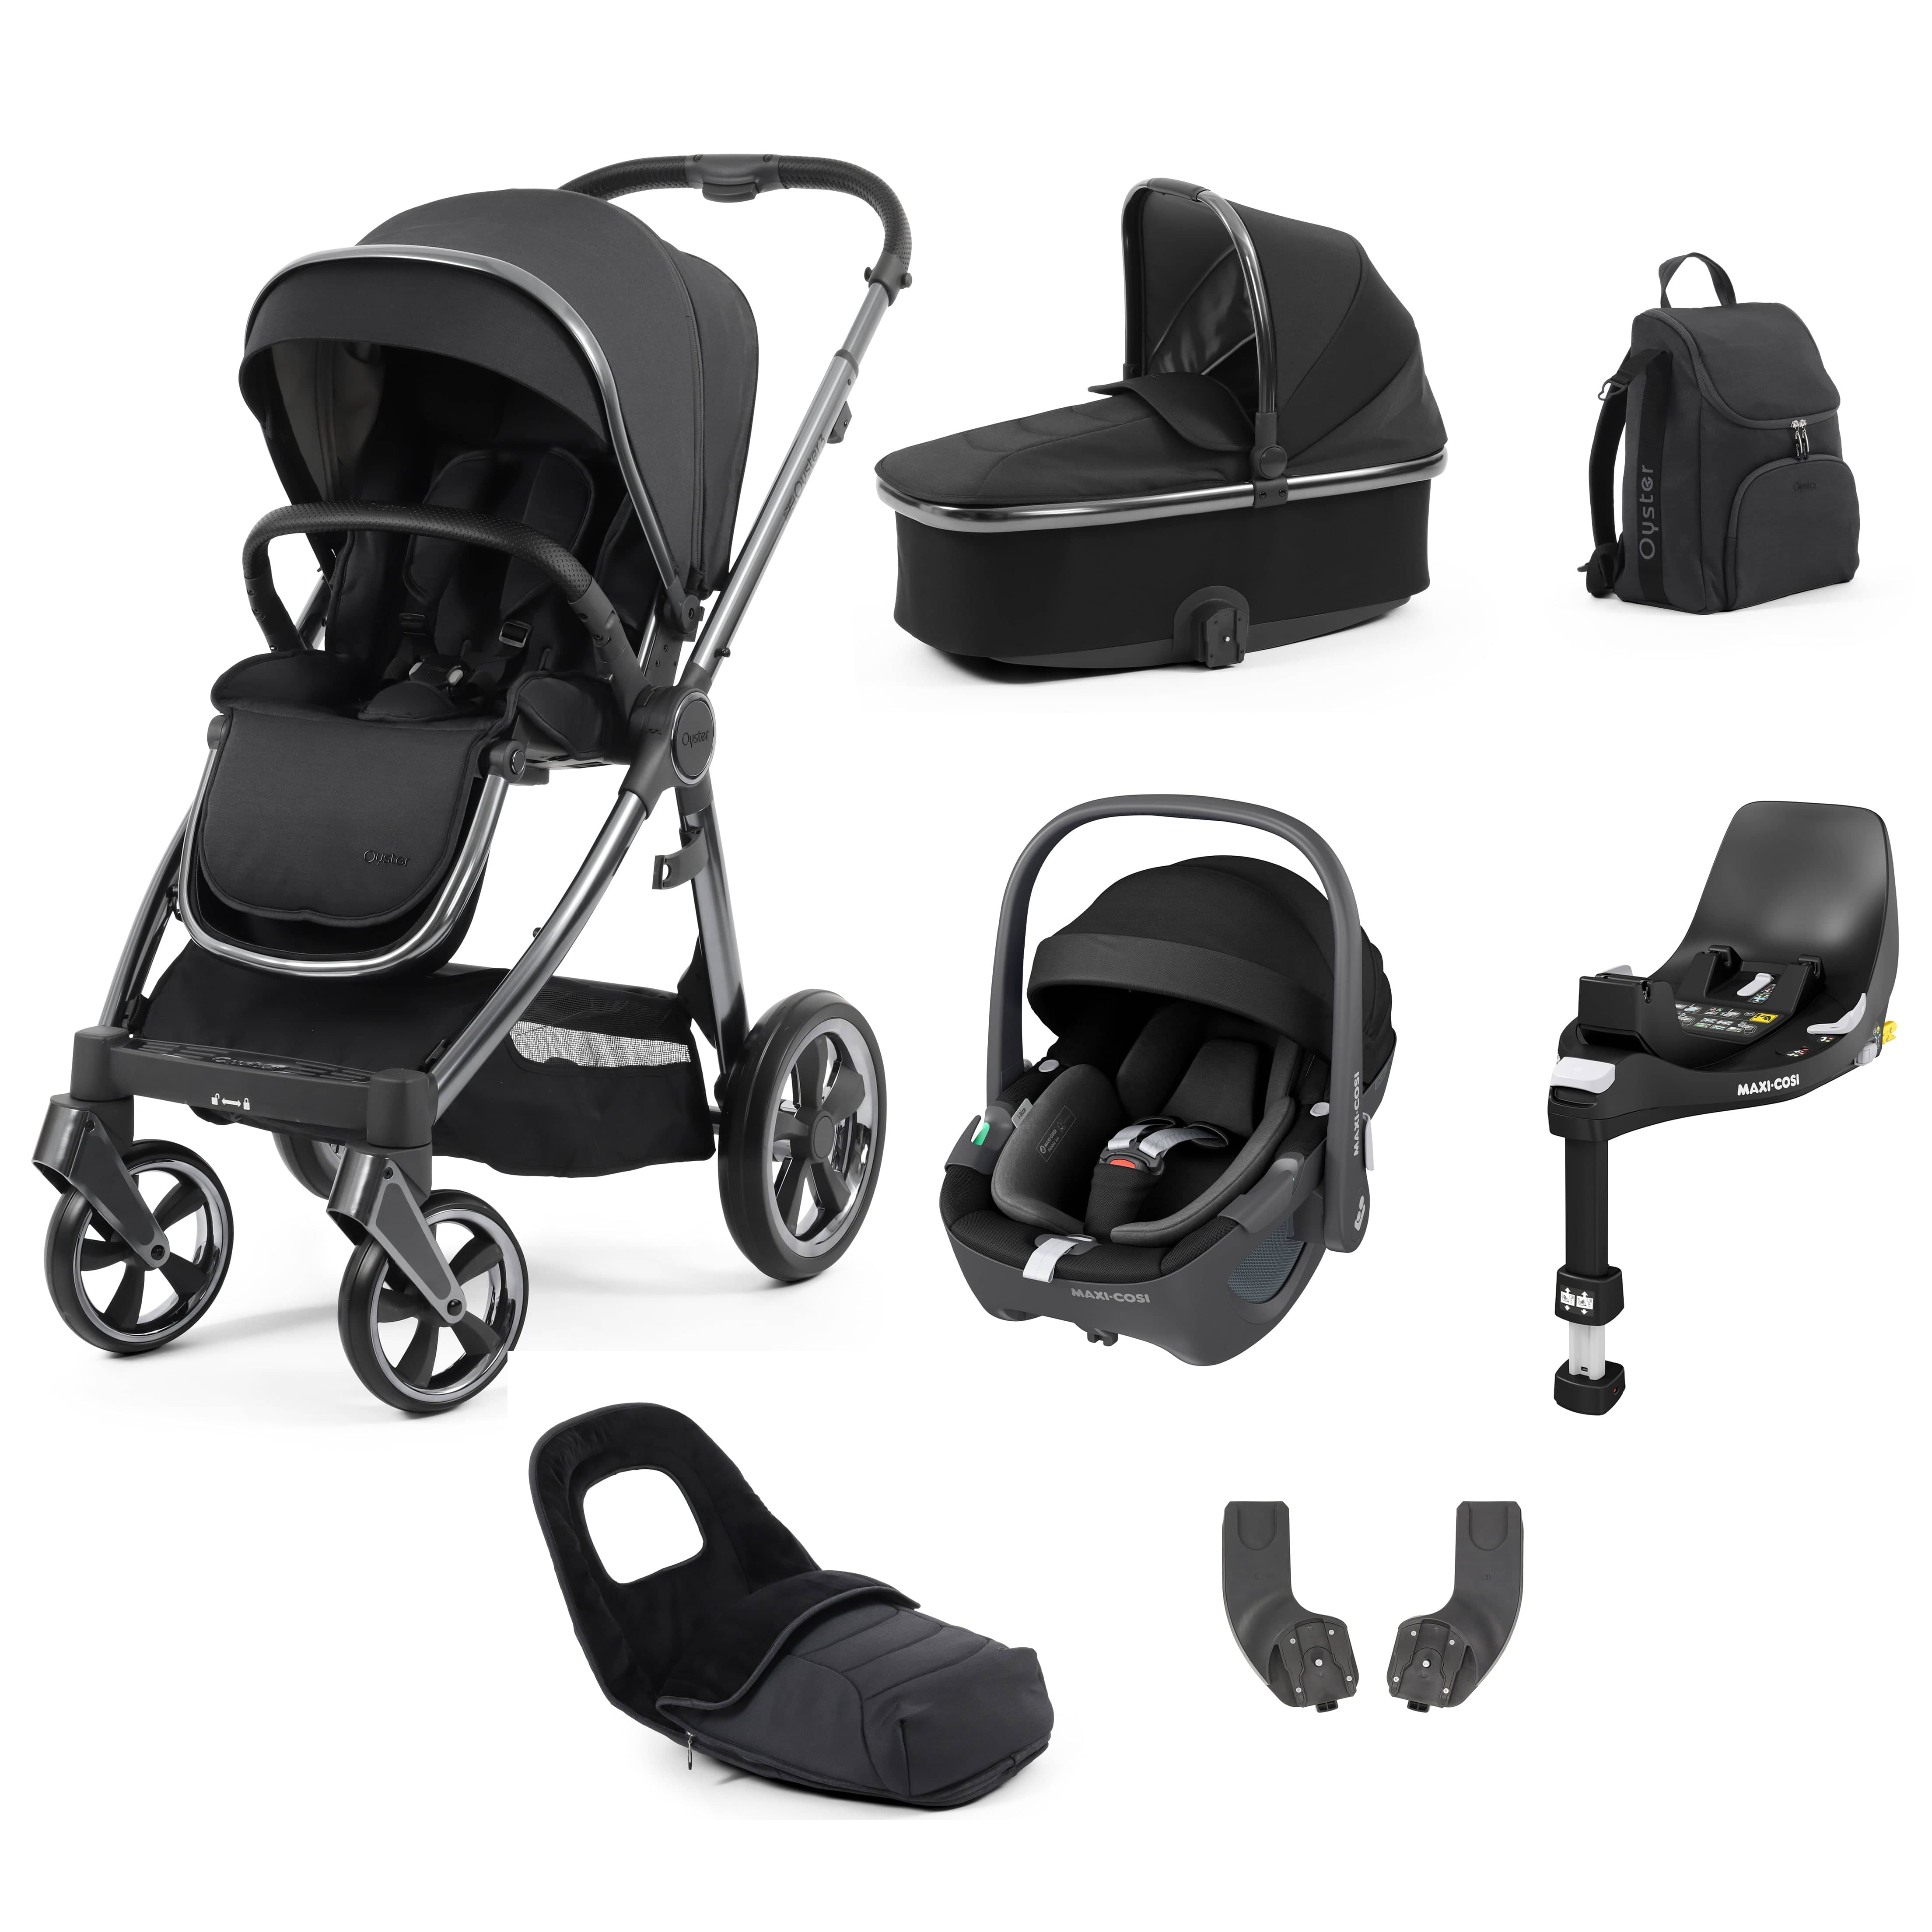 BabyStyle travel systems Babystyle Oyster 3 Luxury 7 Piece with Car Seat Bundle in Carbonite 14805-CRB